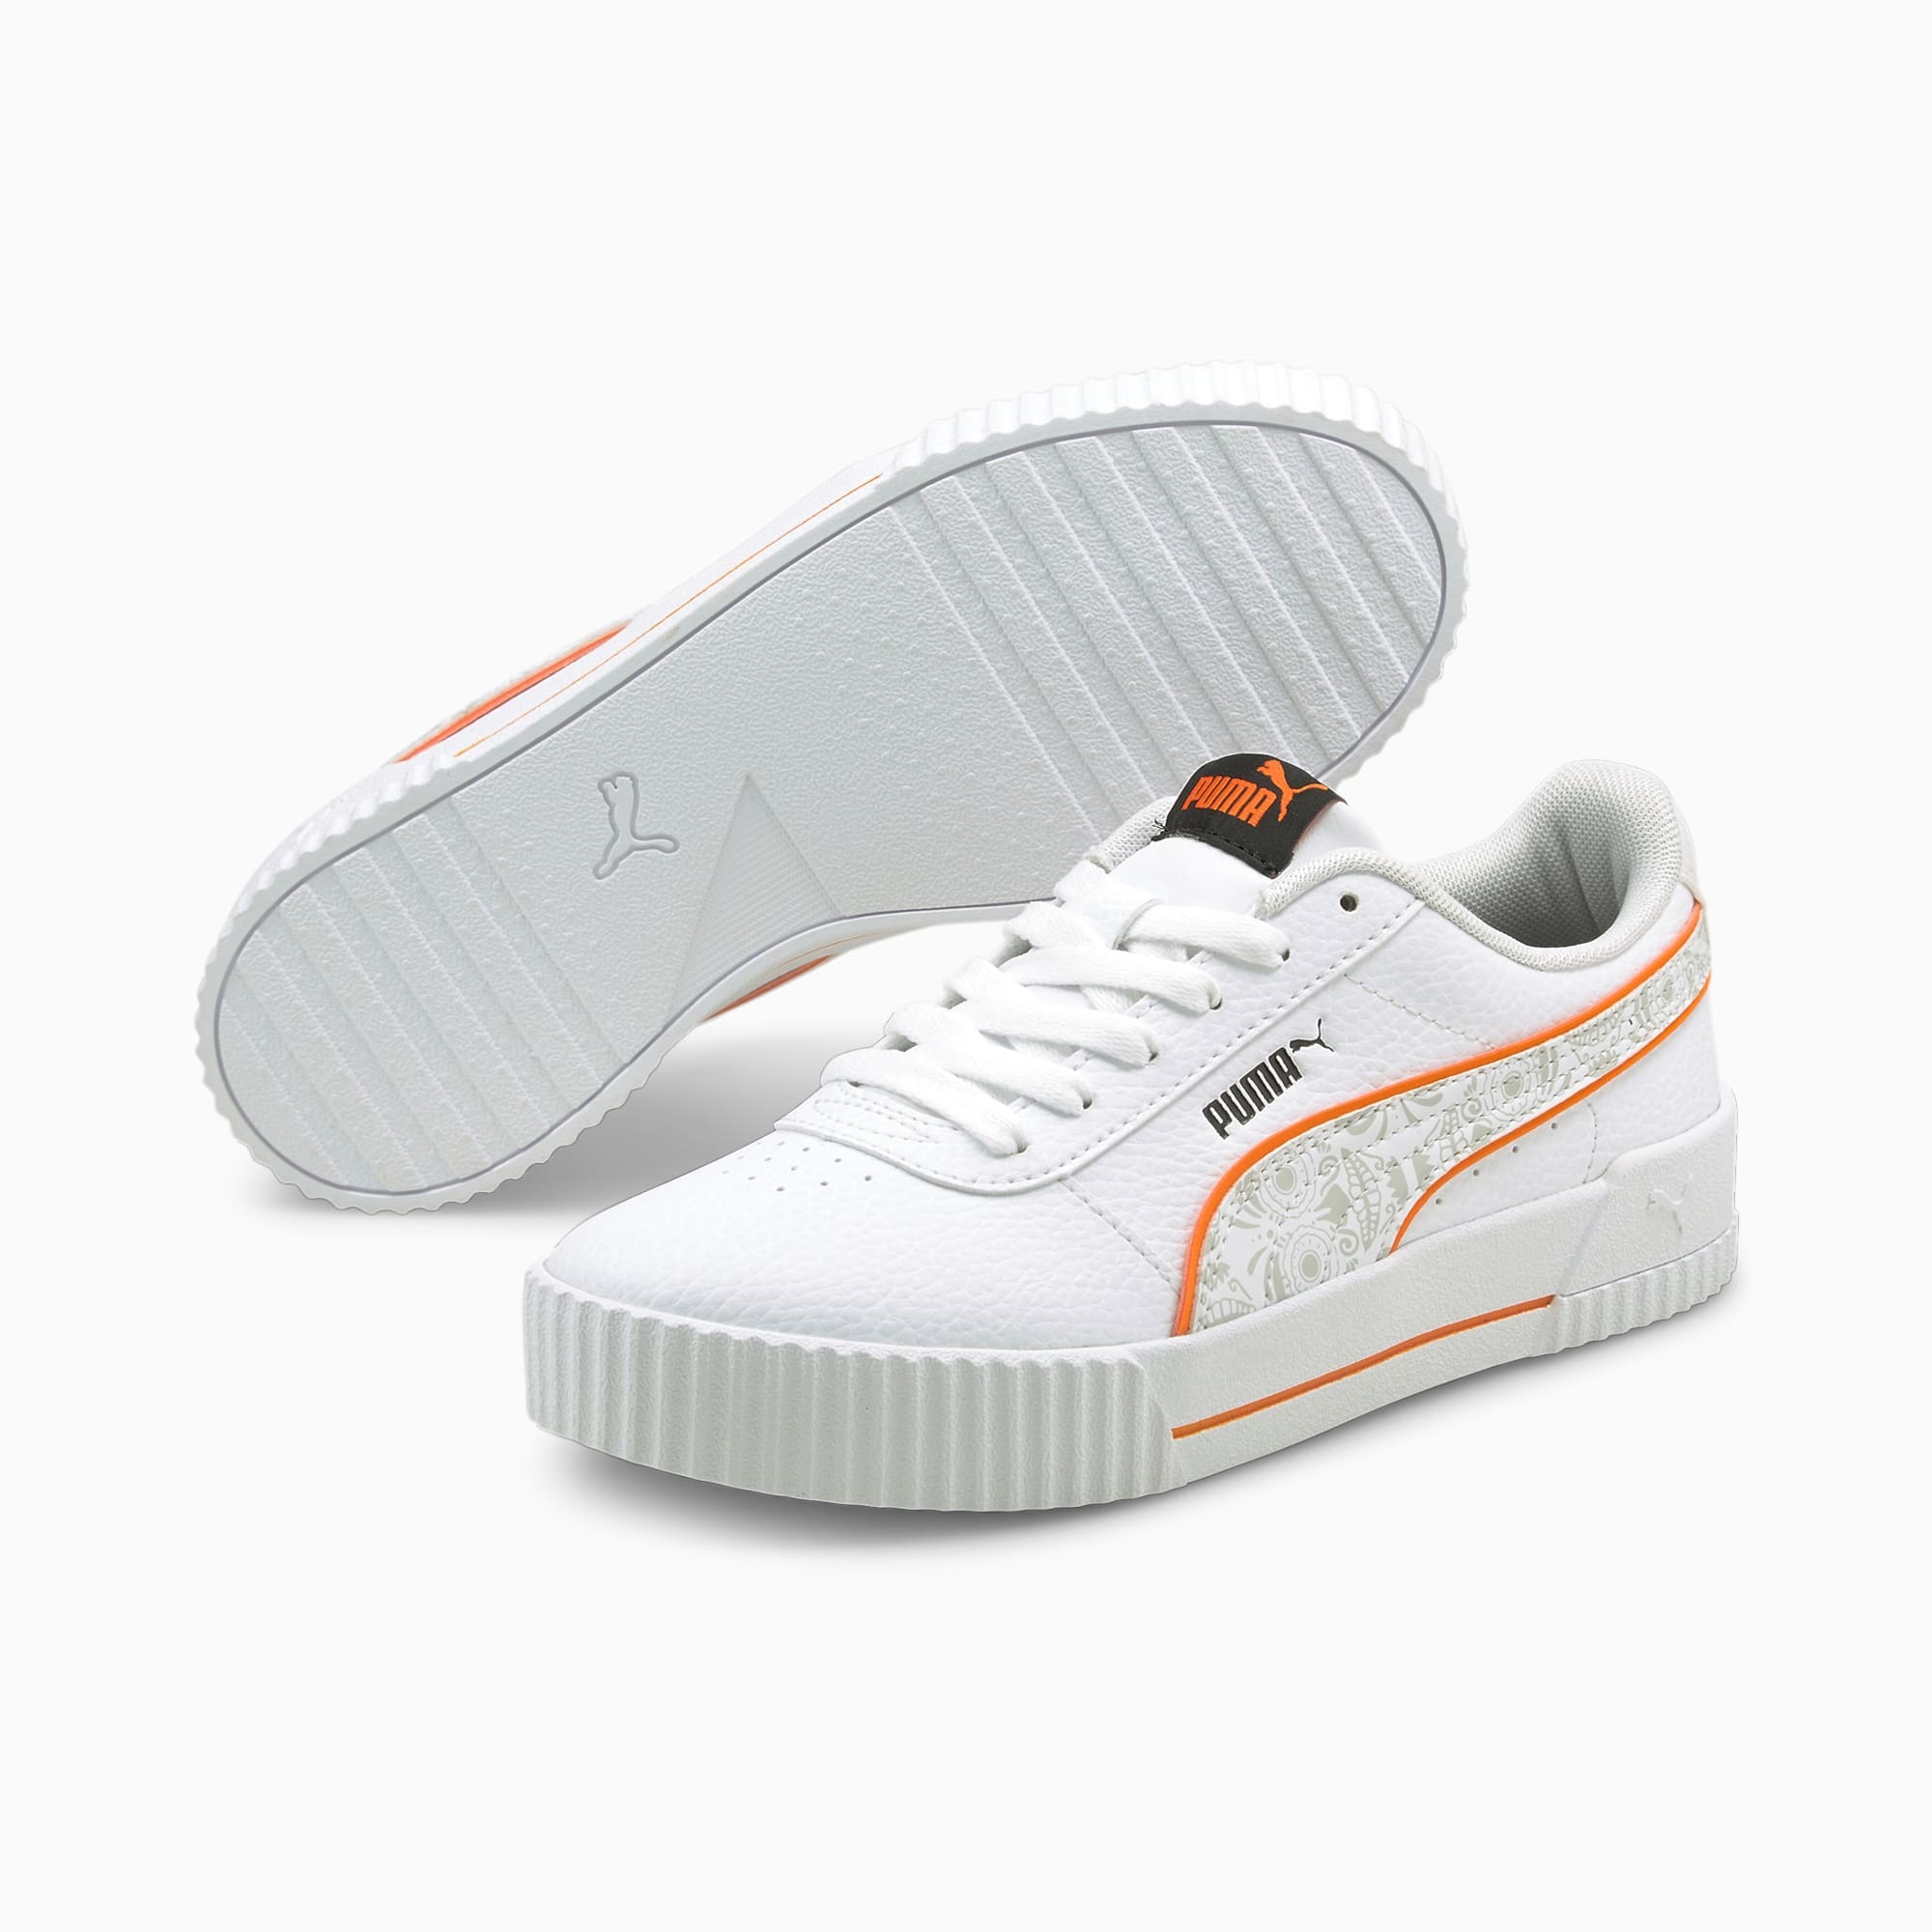 Giày thể thao nữ Puma Carina Scary Women's Sneakers